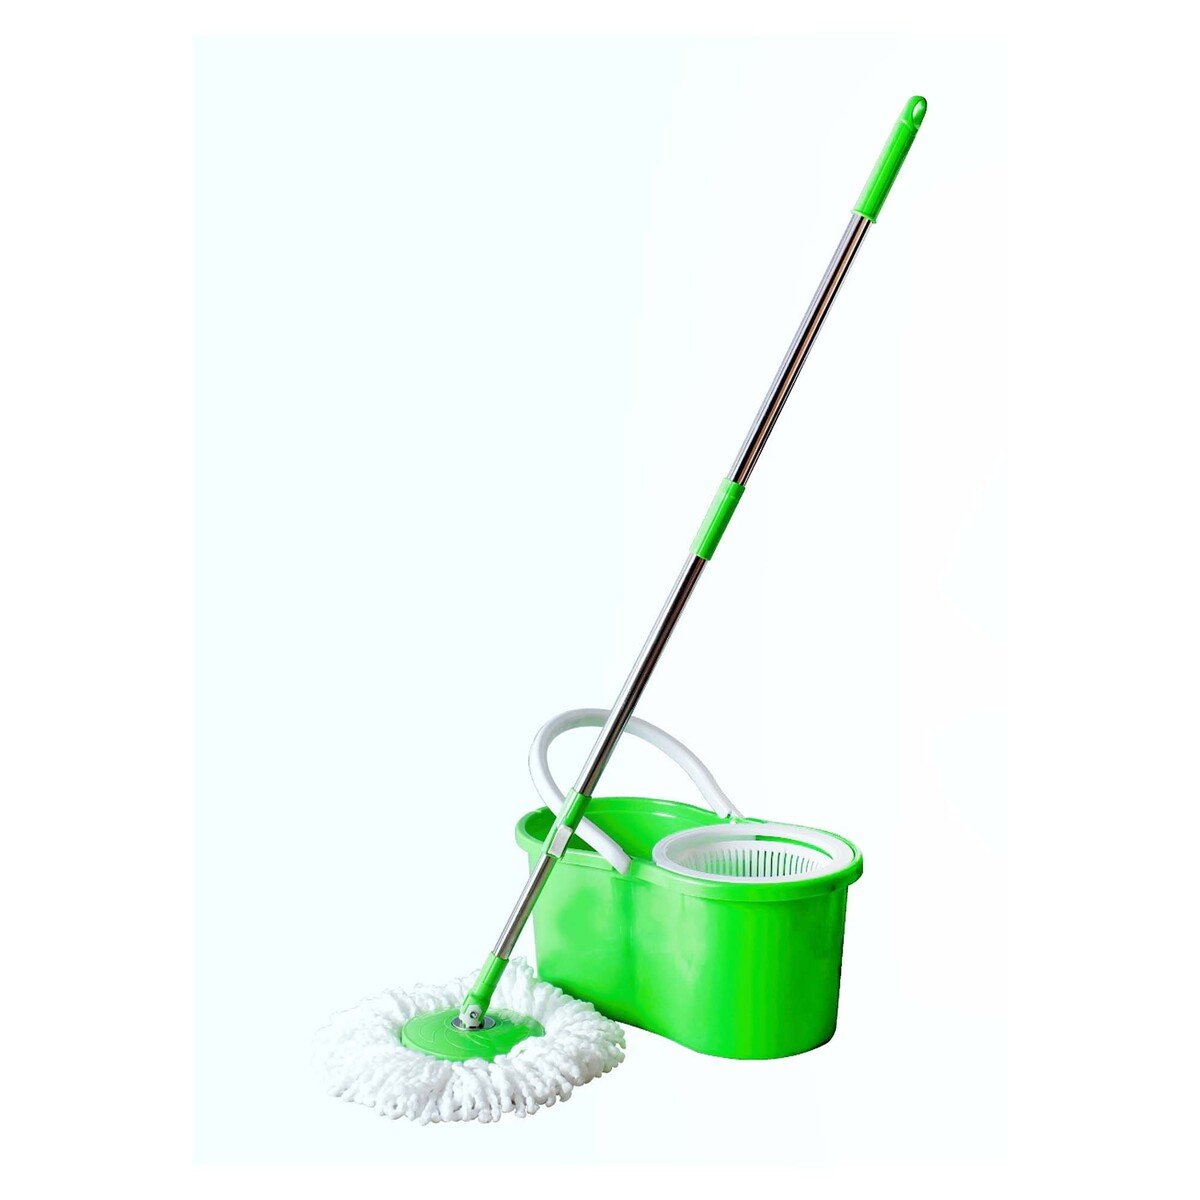 Gebi Super Spin Mop with Bucket 116, 1 pc, Assorted Colors